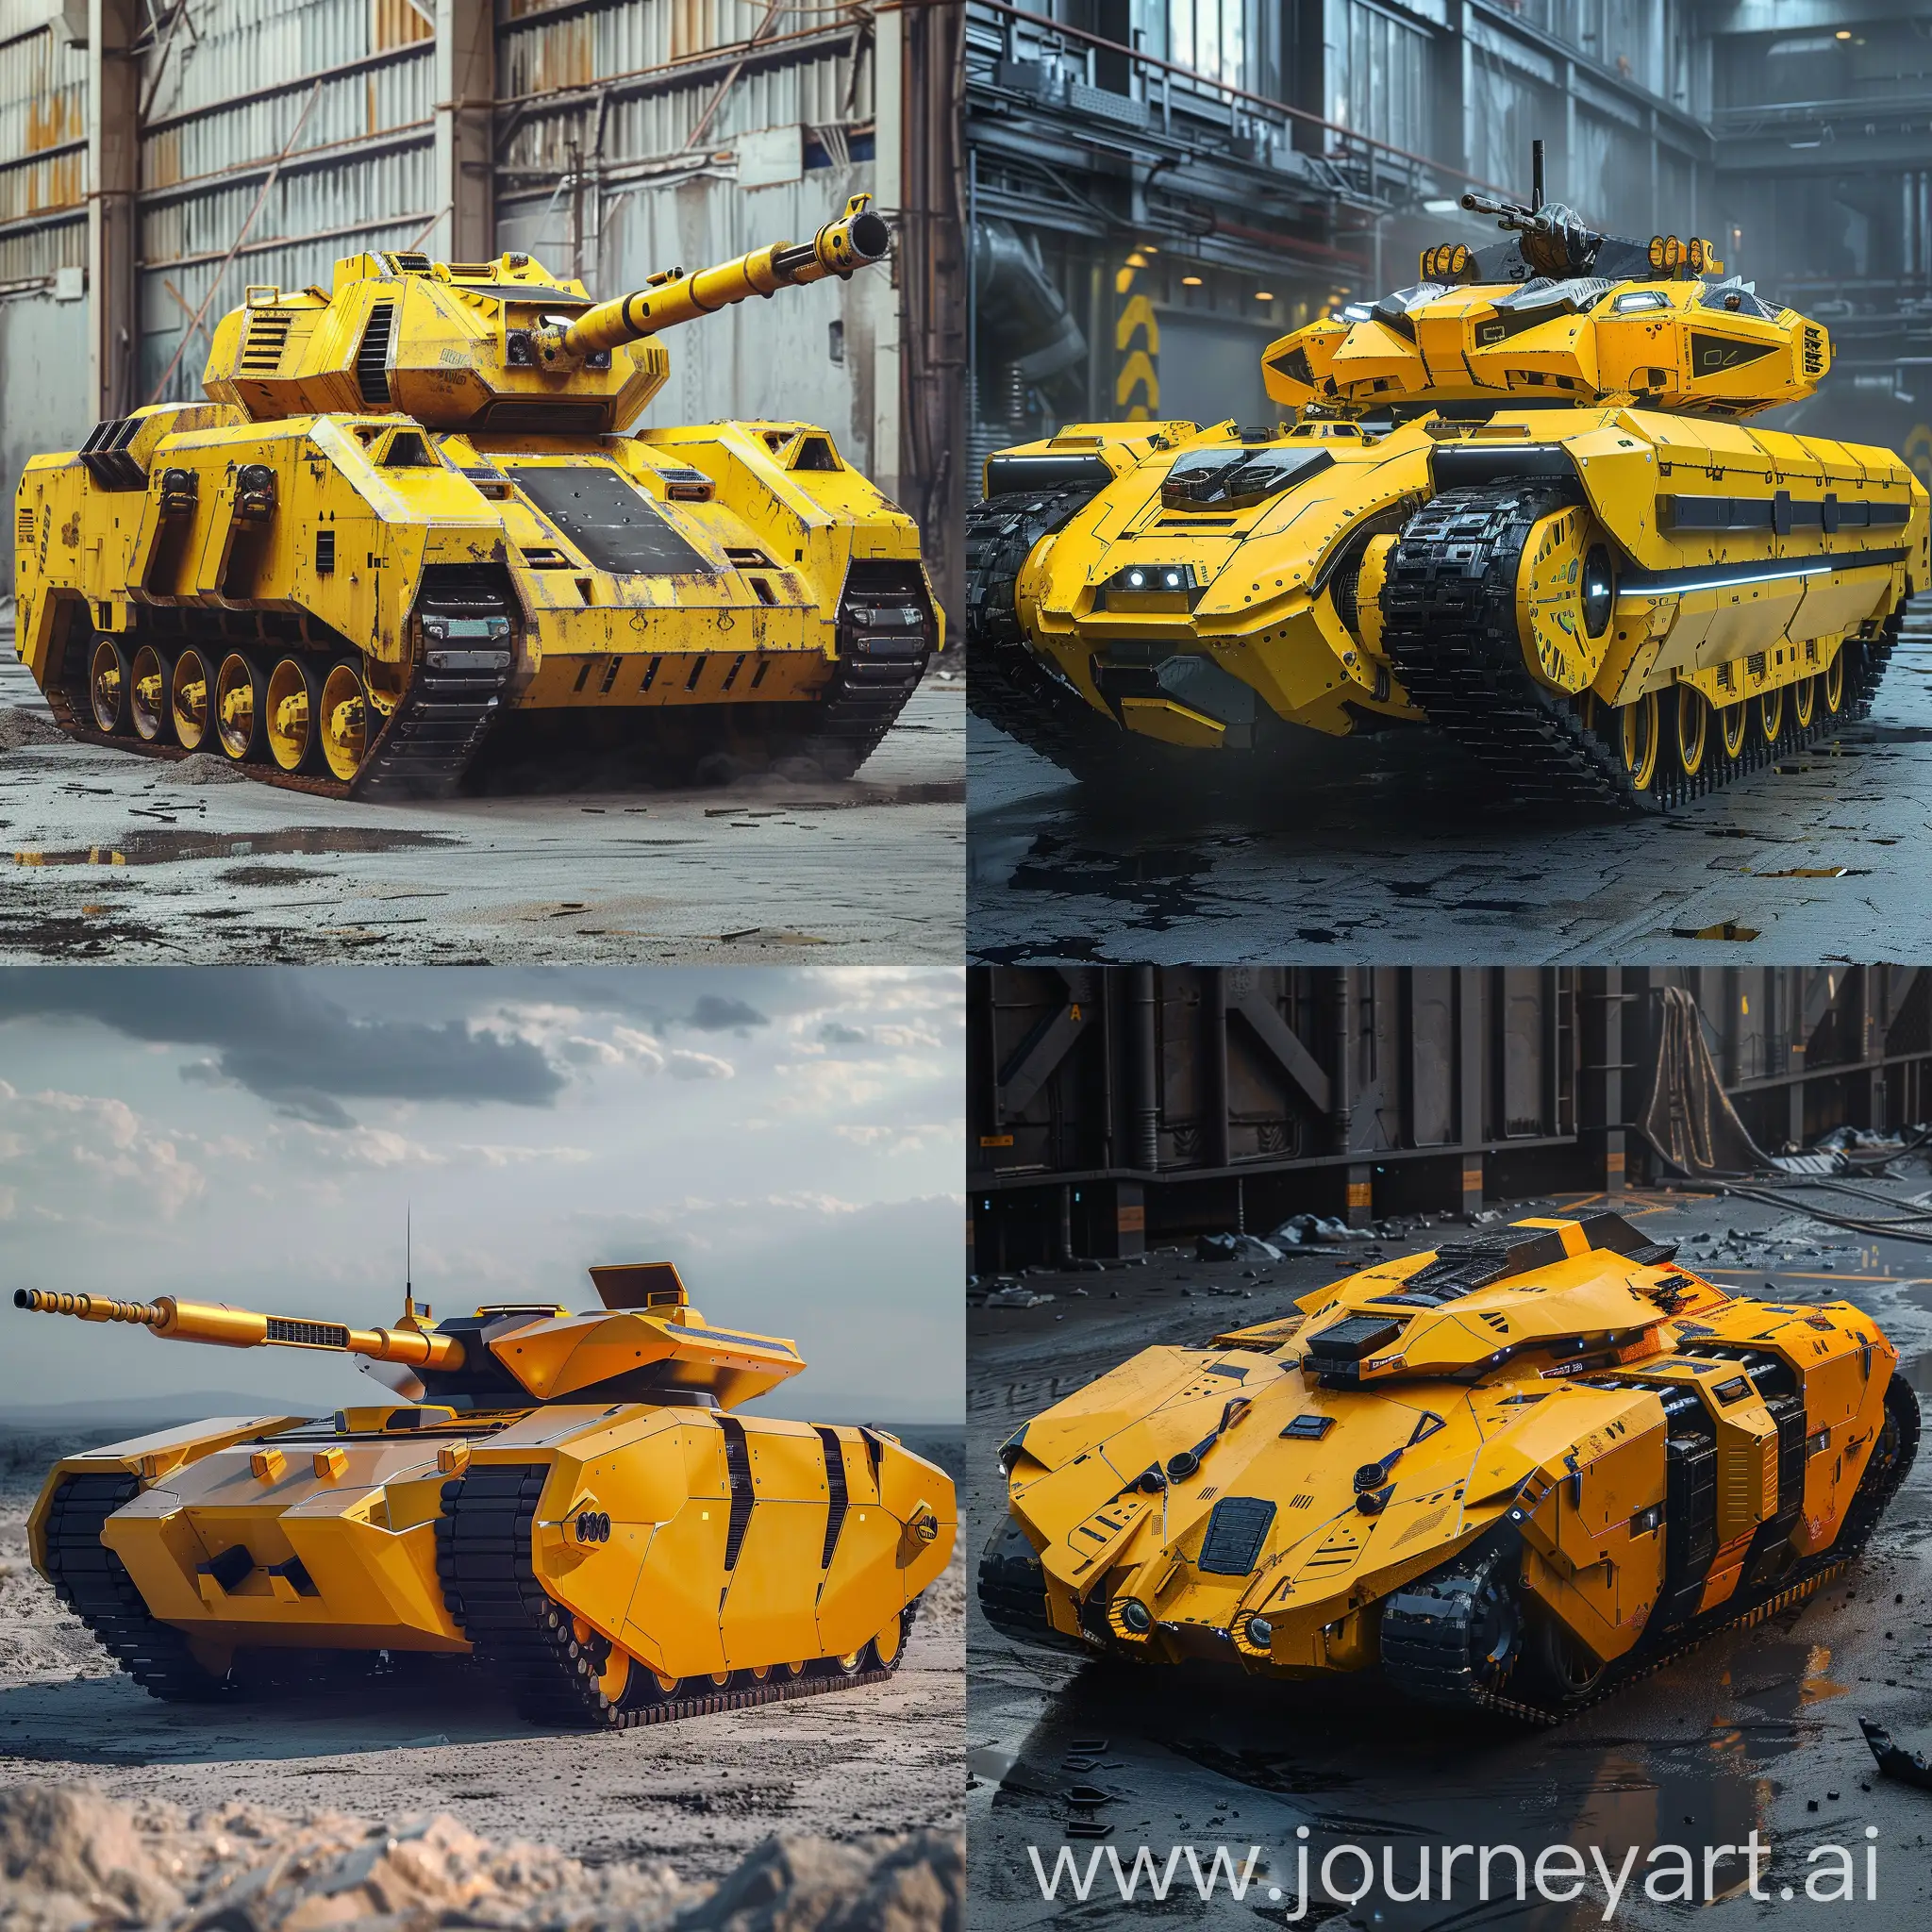 Non-existent yellow armored military tank of the future, realistic full-size photo